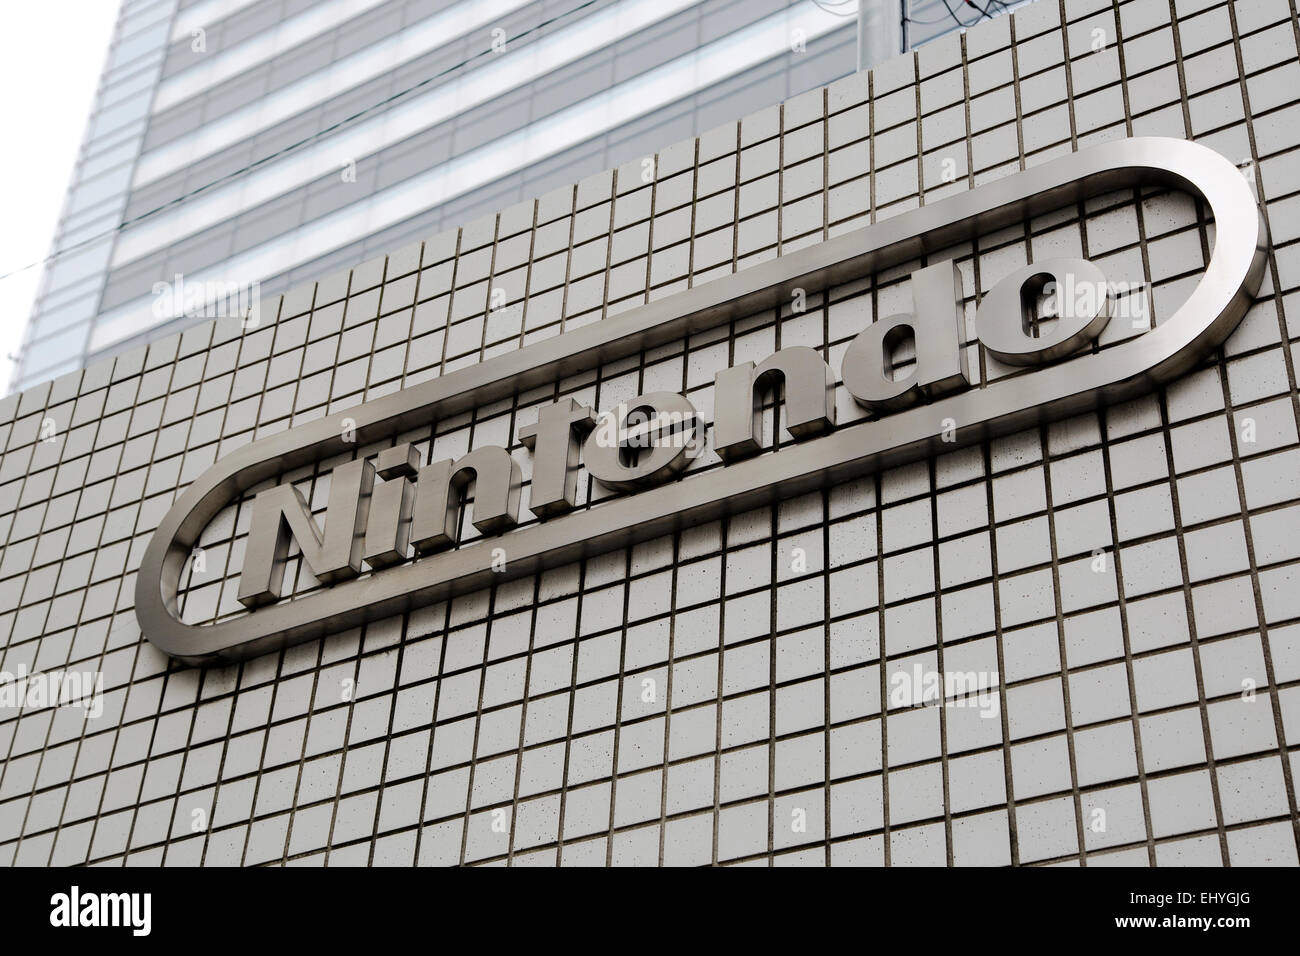 Nintendo Co, Ltd. logo on display outside the Nintendo Tokyo Branch Office  on March 19, 2015, Tokyo, Japan. In a press conference on Tuesday 17th  Nintendo announced a new alliance with Japanese